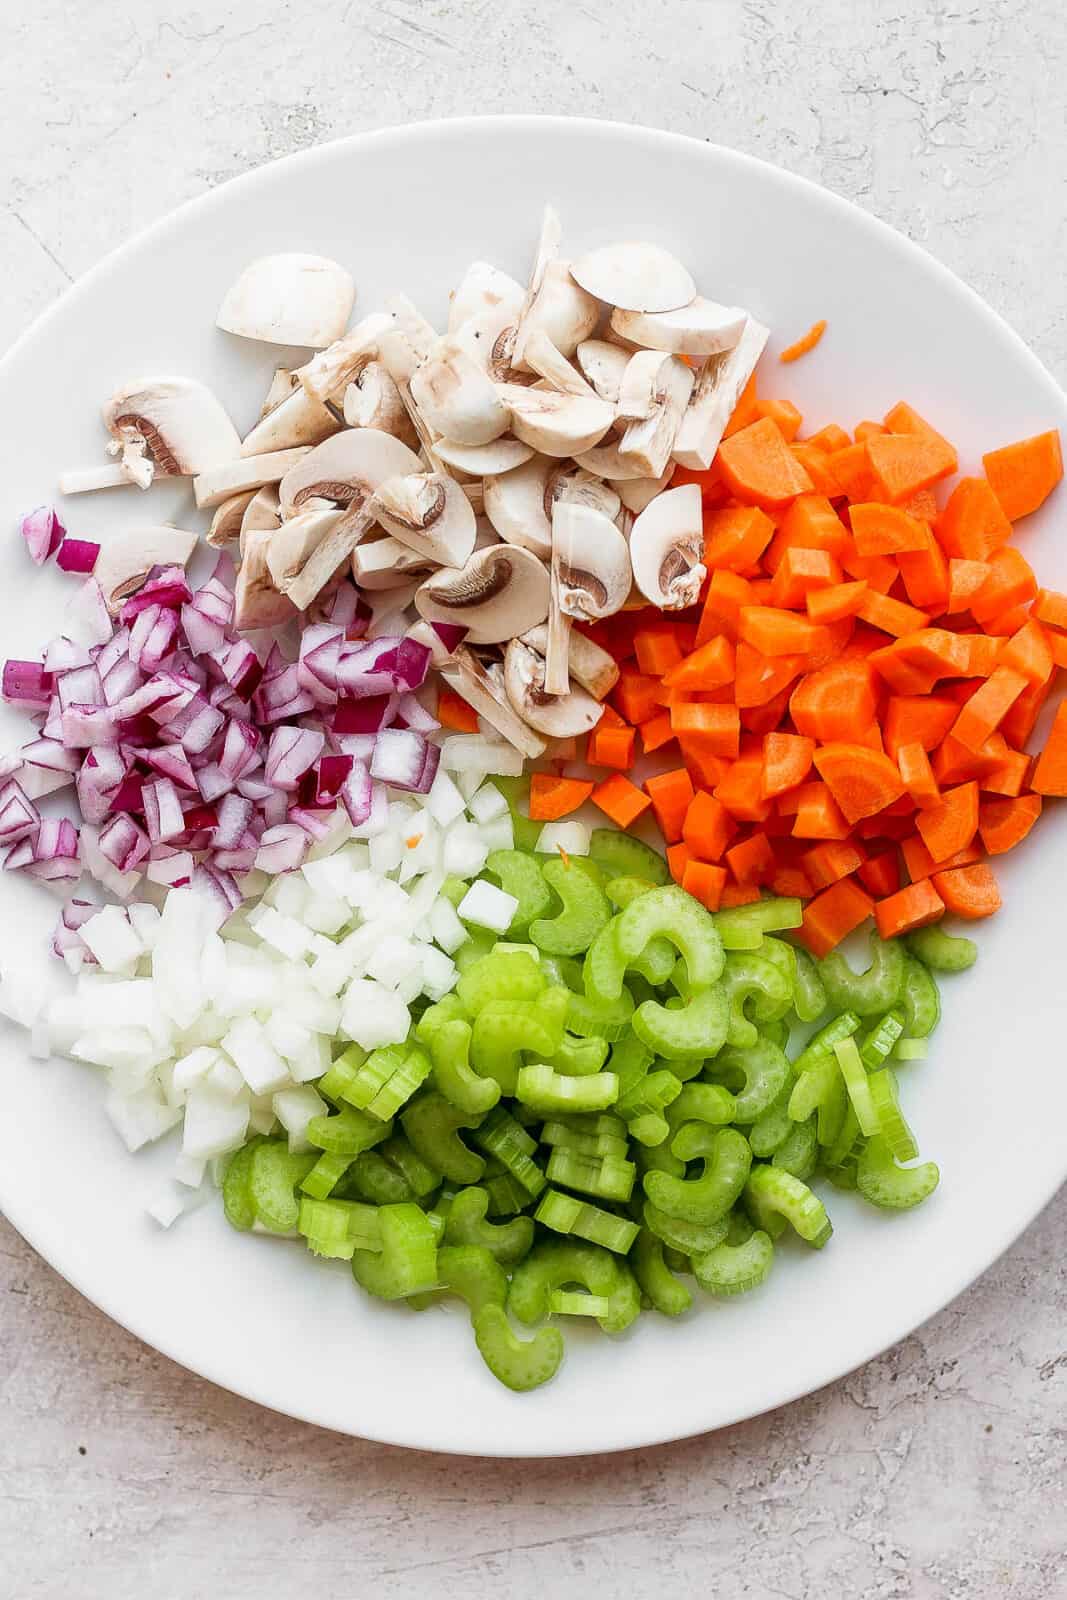 Cut up vegetables on a plate for shepherd's pie.